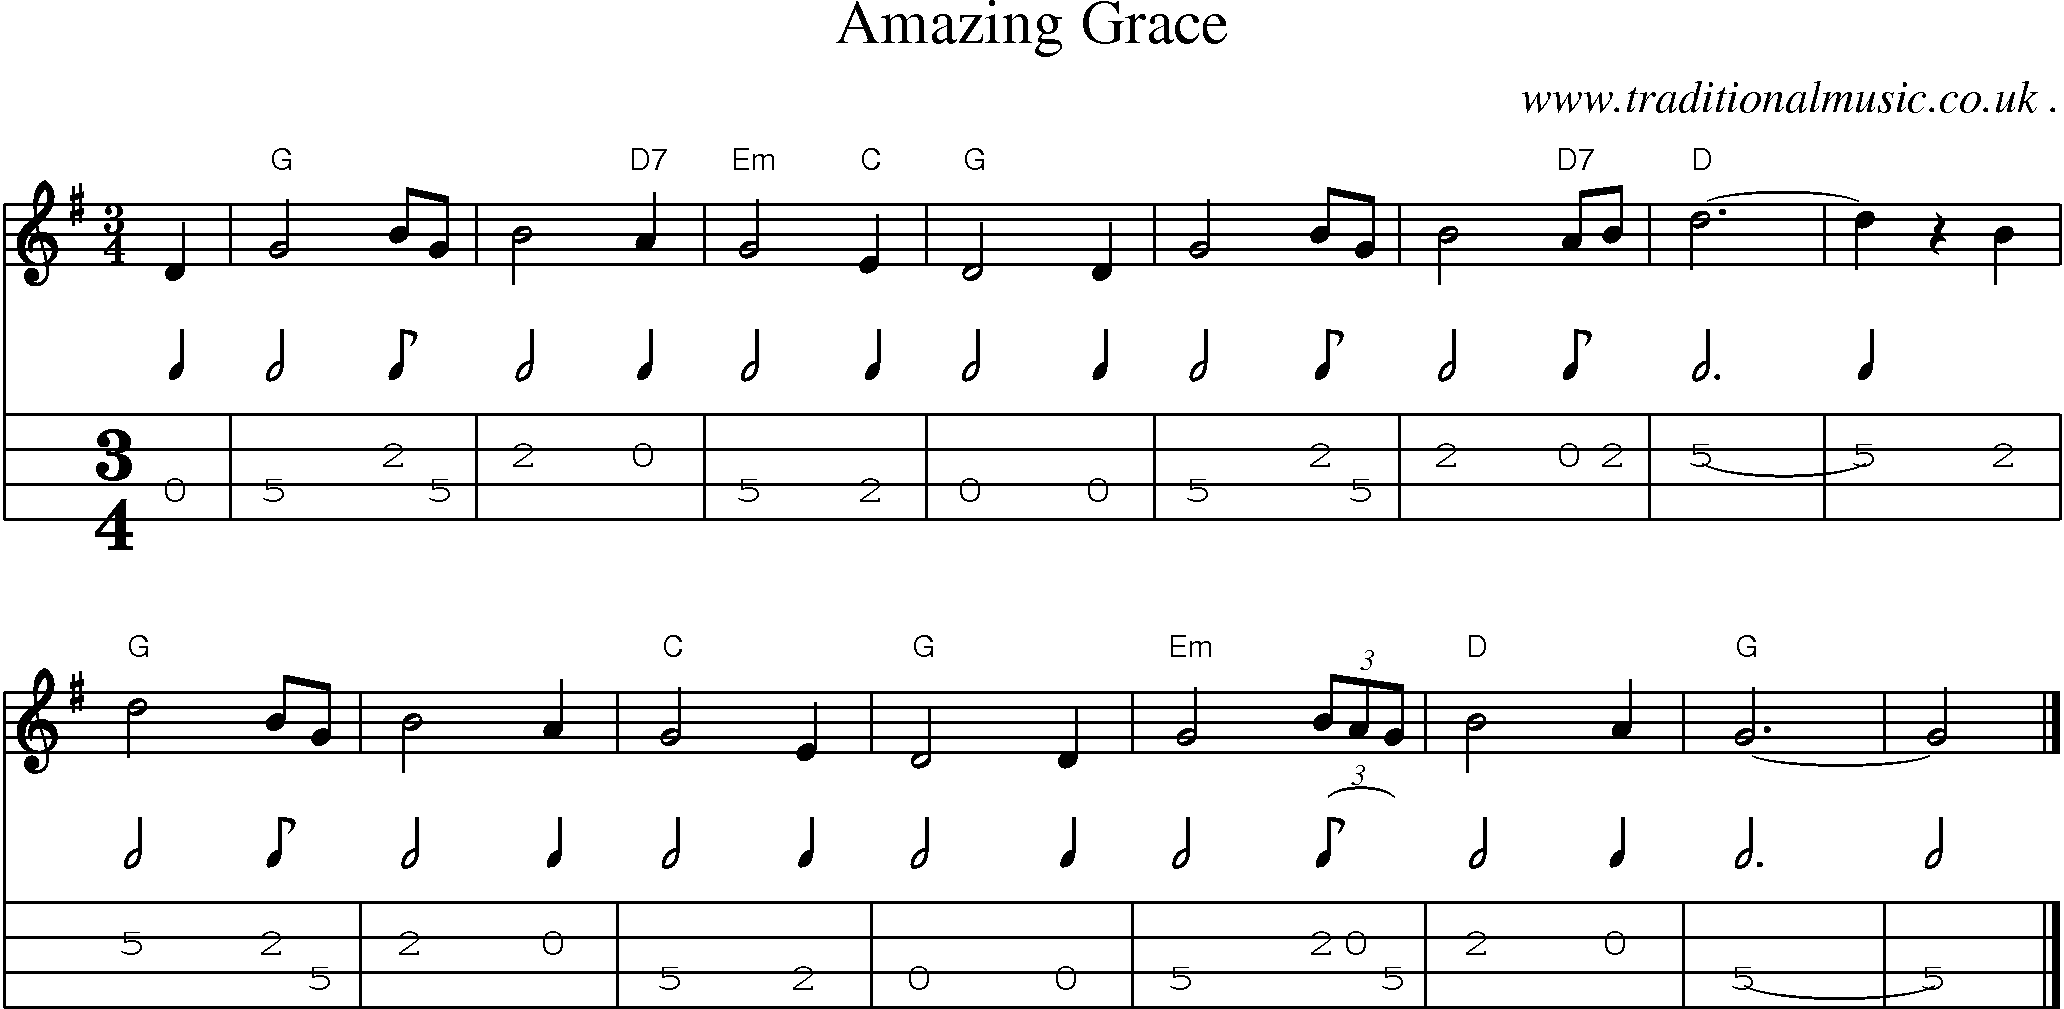 Music Score and Guitar Tabs for Amazing Grace